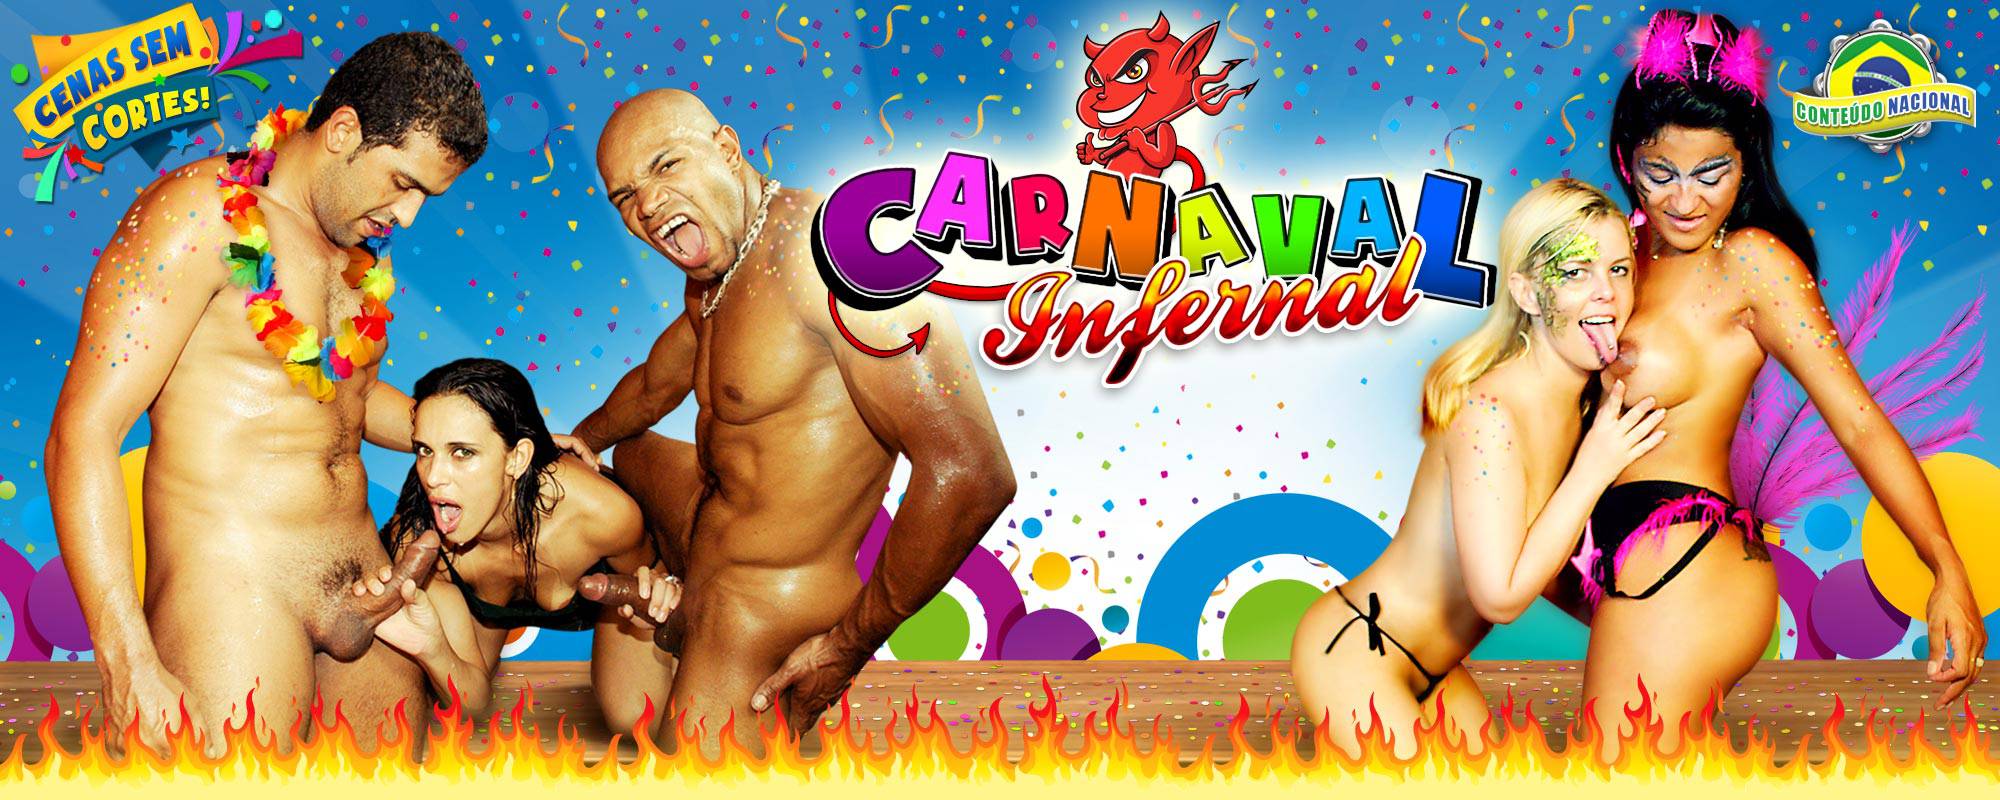 Carnaval Sex Party 5